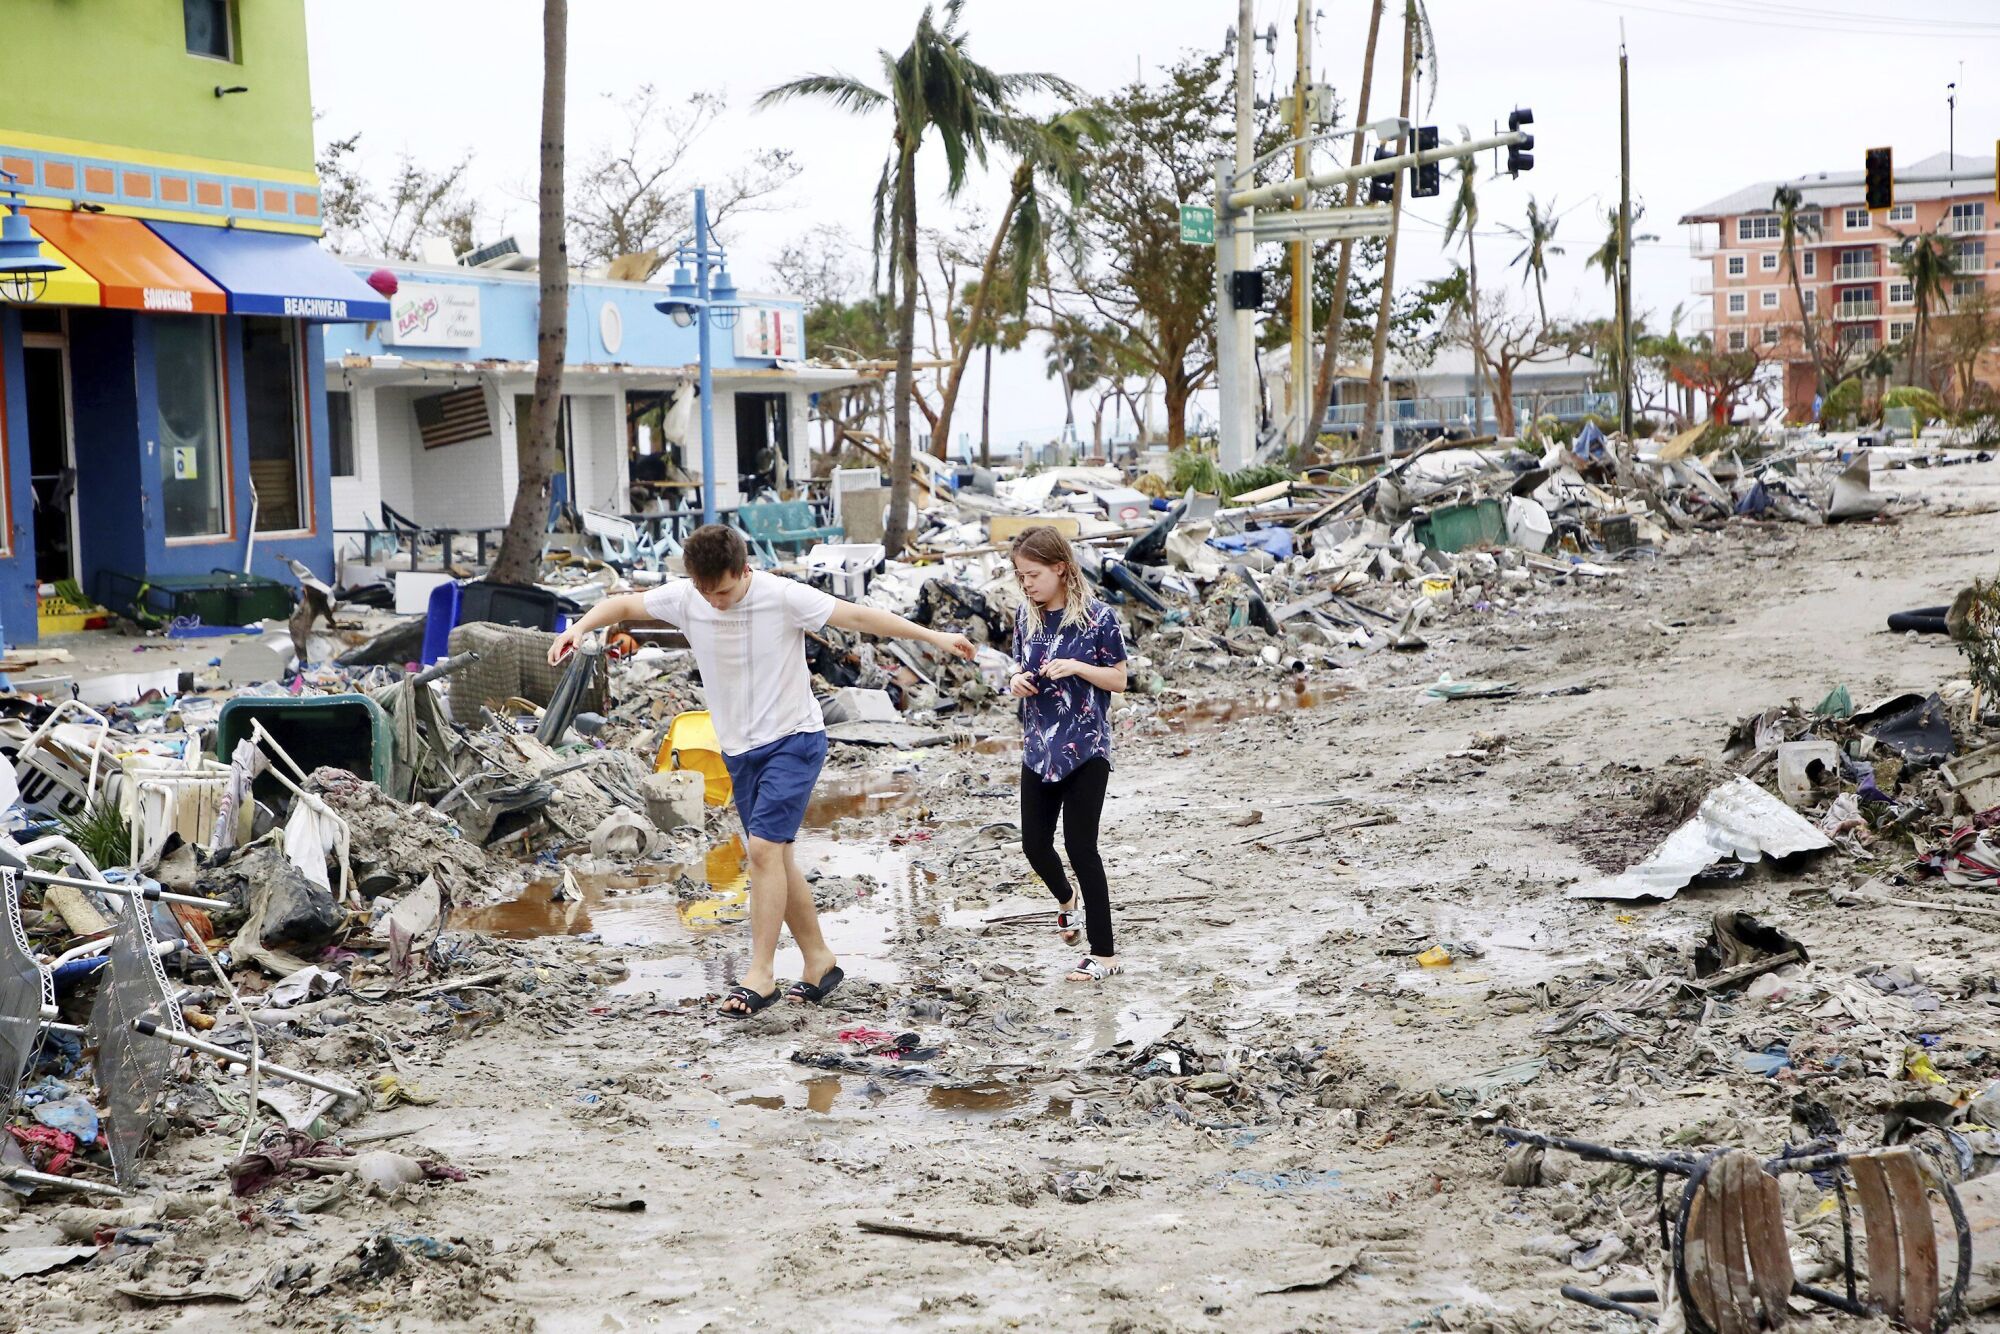 Jake Moses, left, and Heather Jones explore a section of destroyed businesses at Fort Myers Beach, Fla.